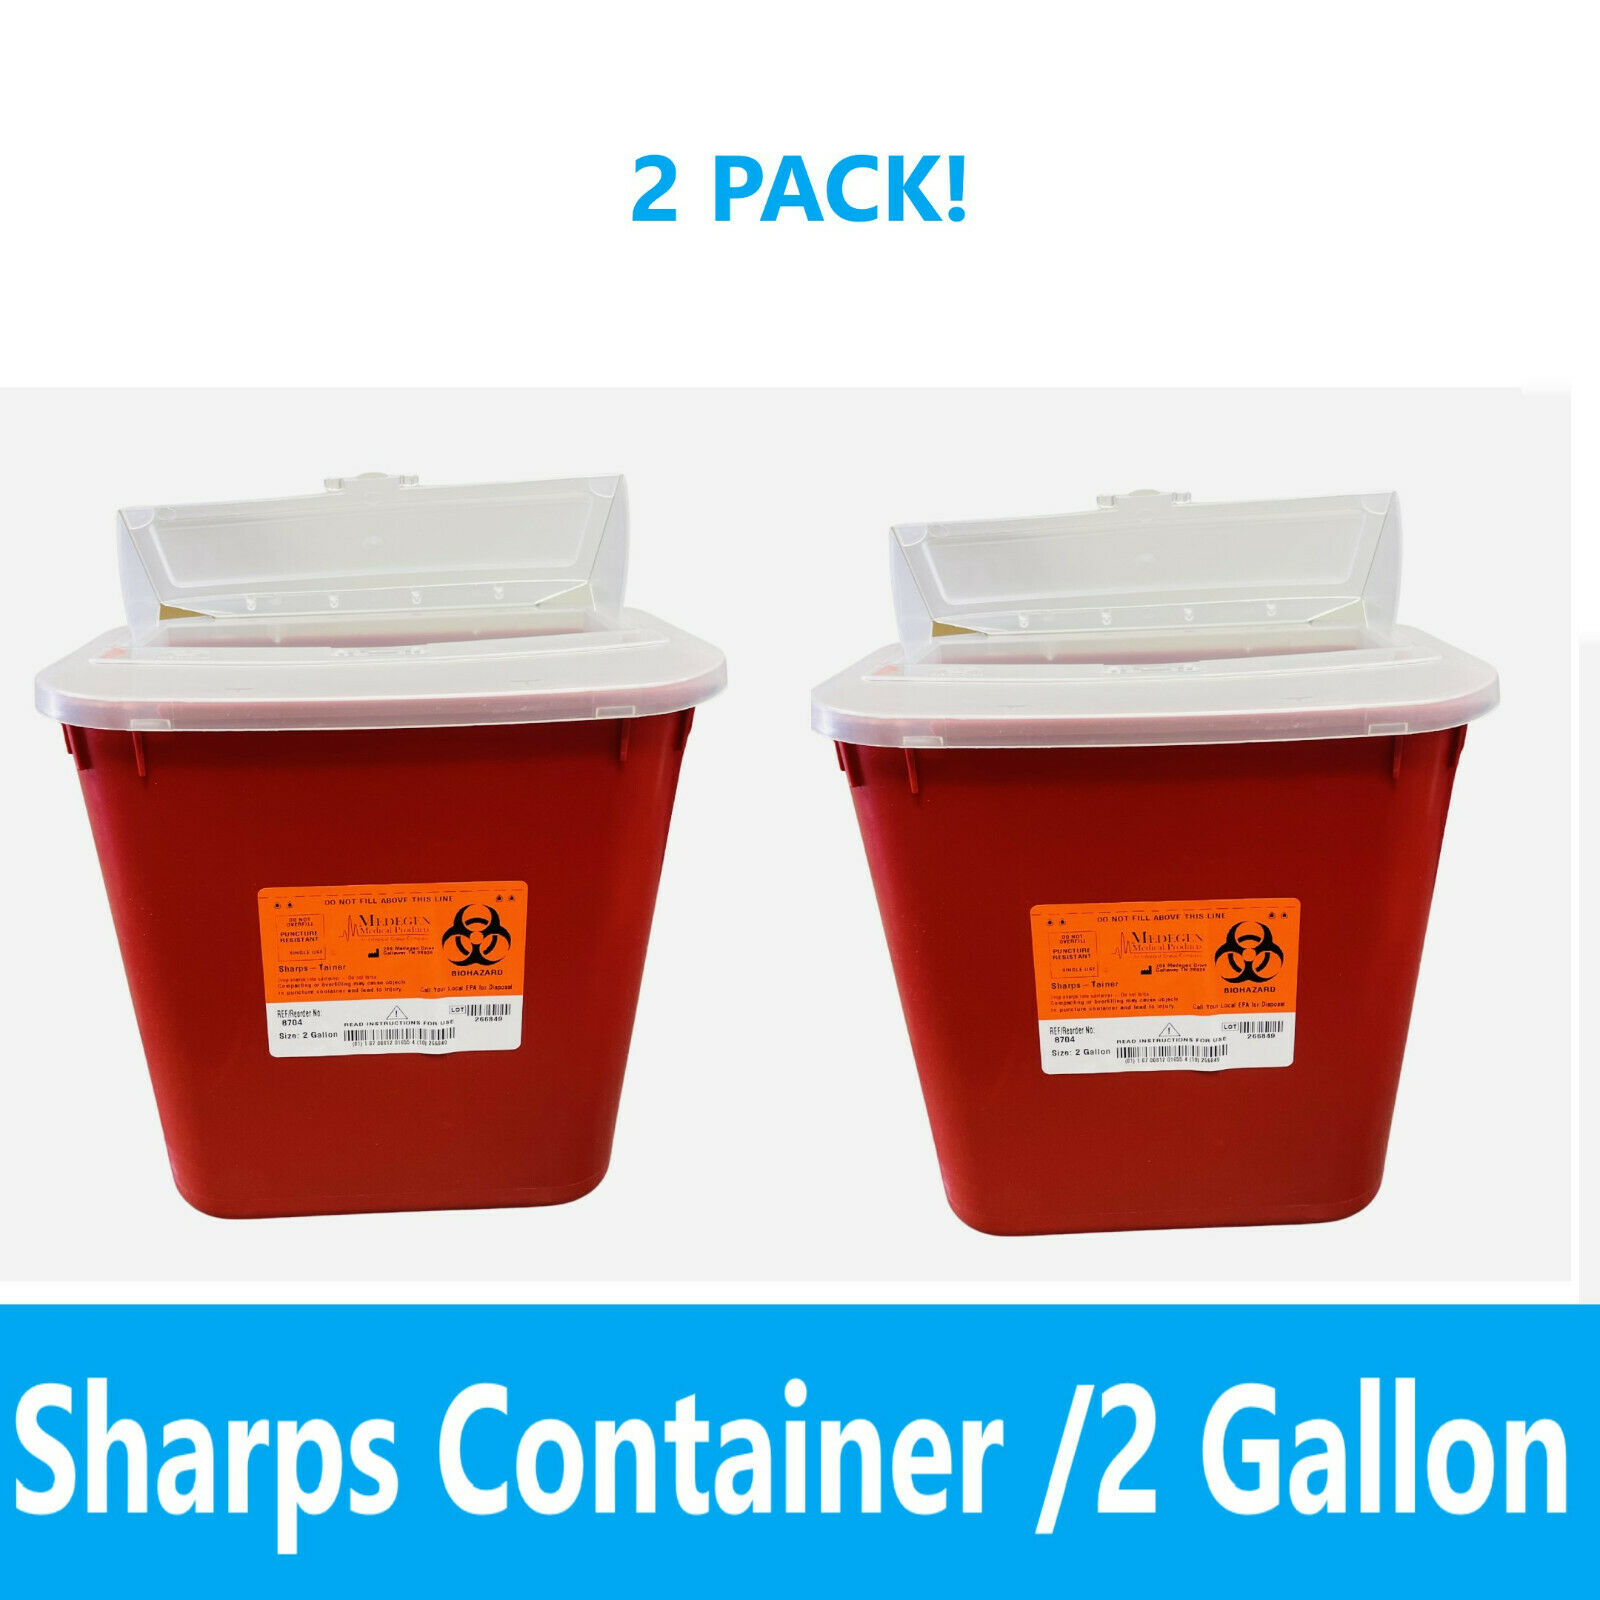 Sharps Container 2 Gallon Biohazard Needle Disposal Doctor Tattoo - 2 PACK